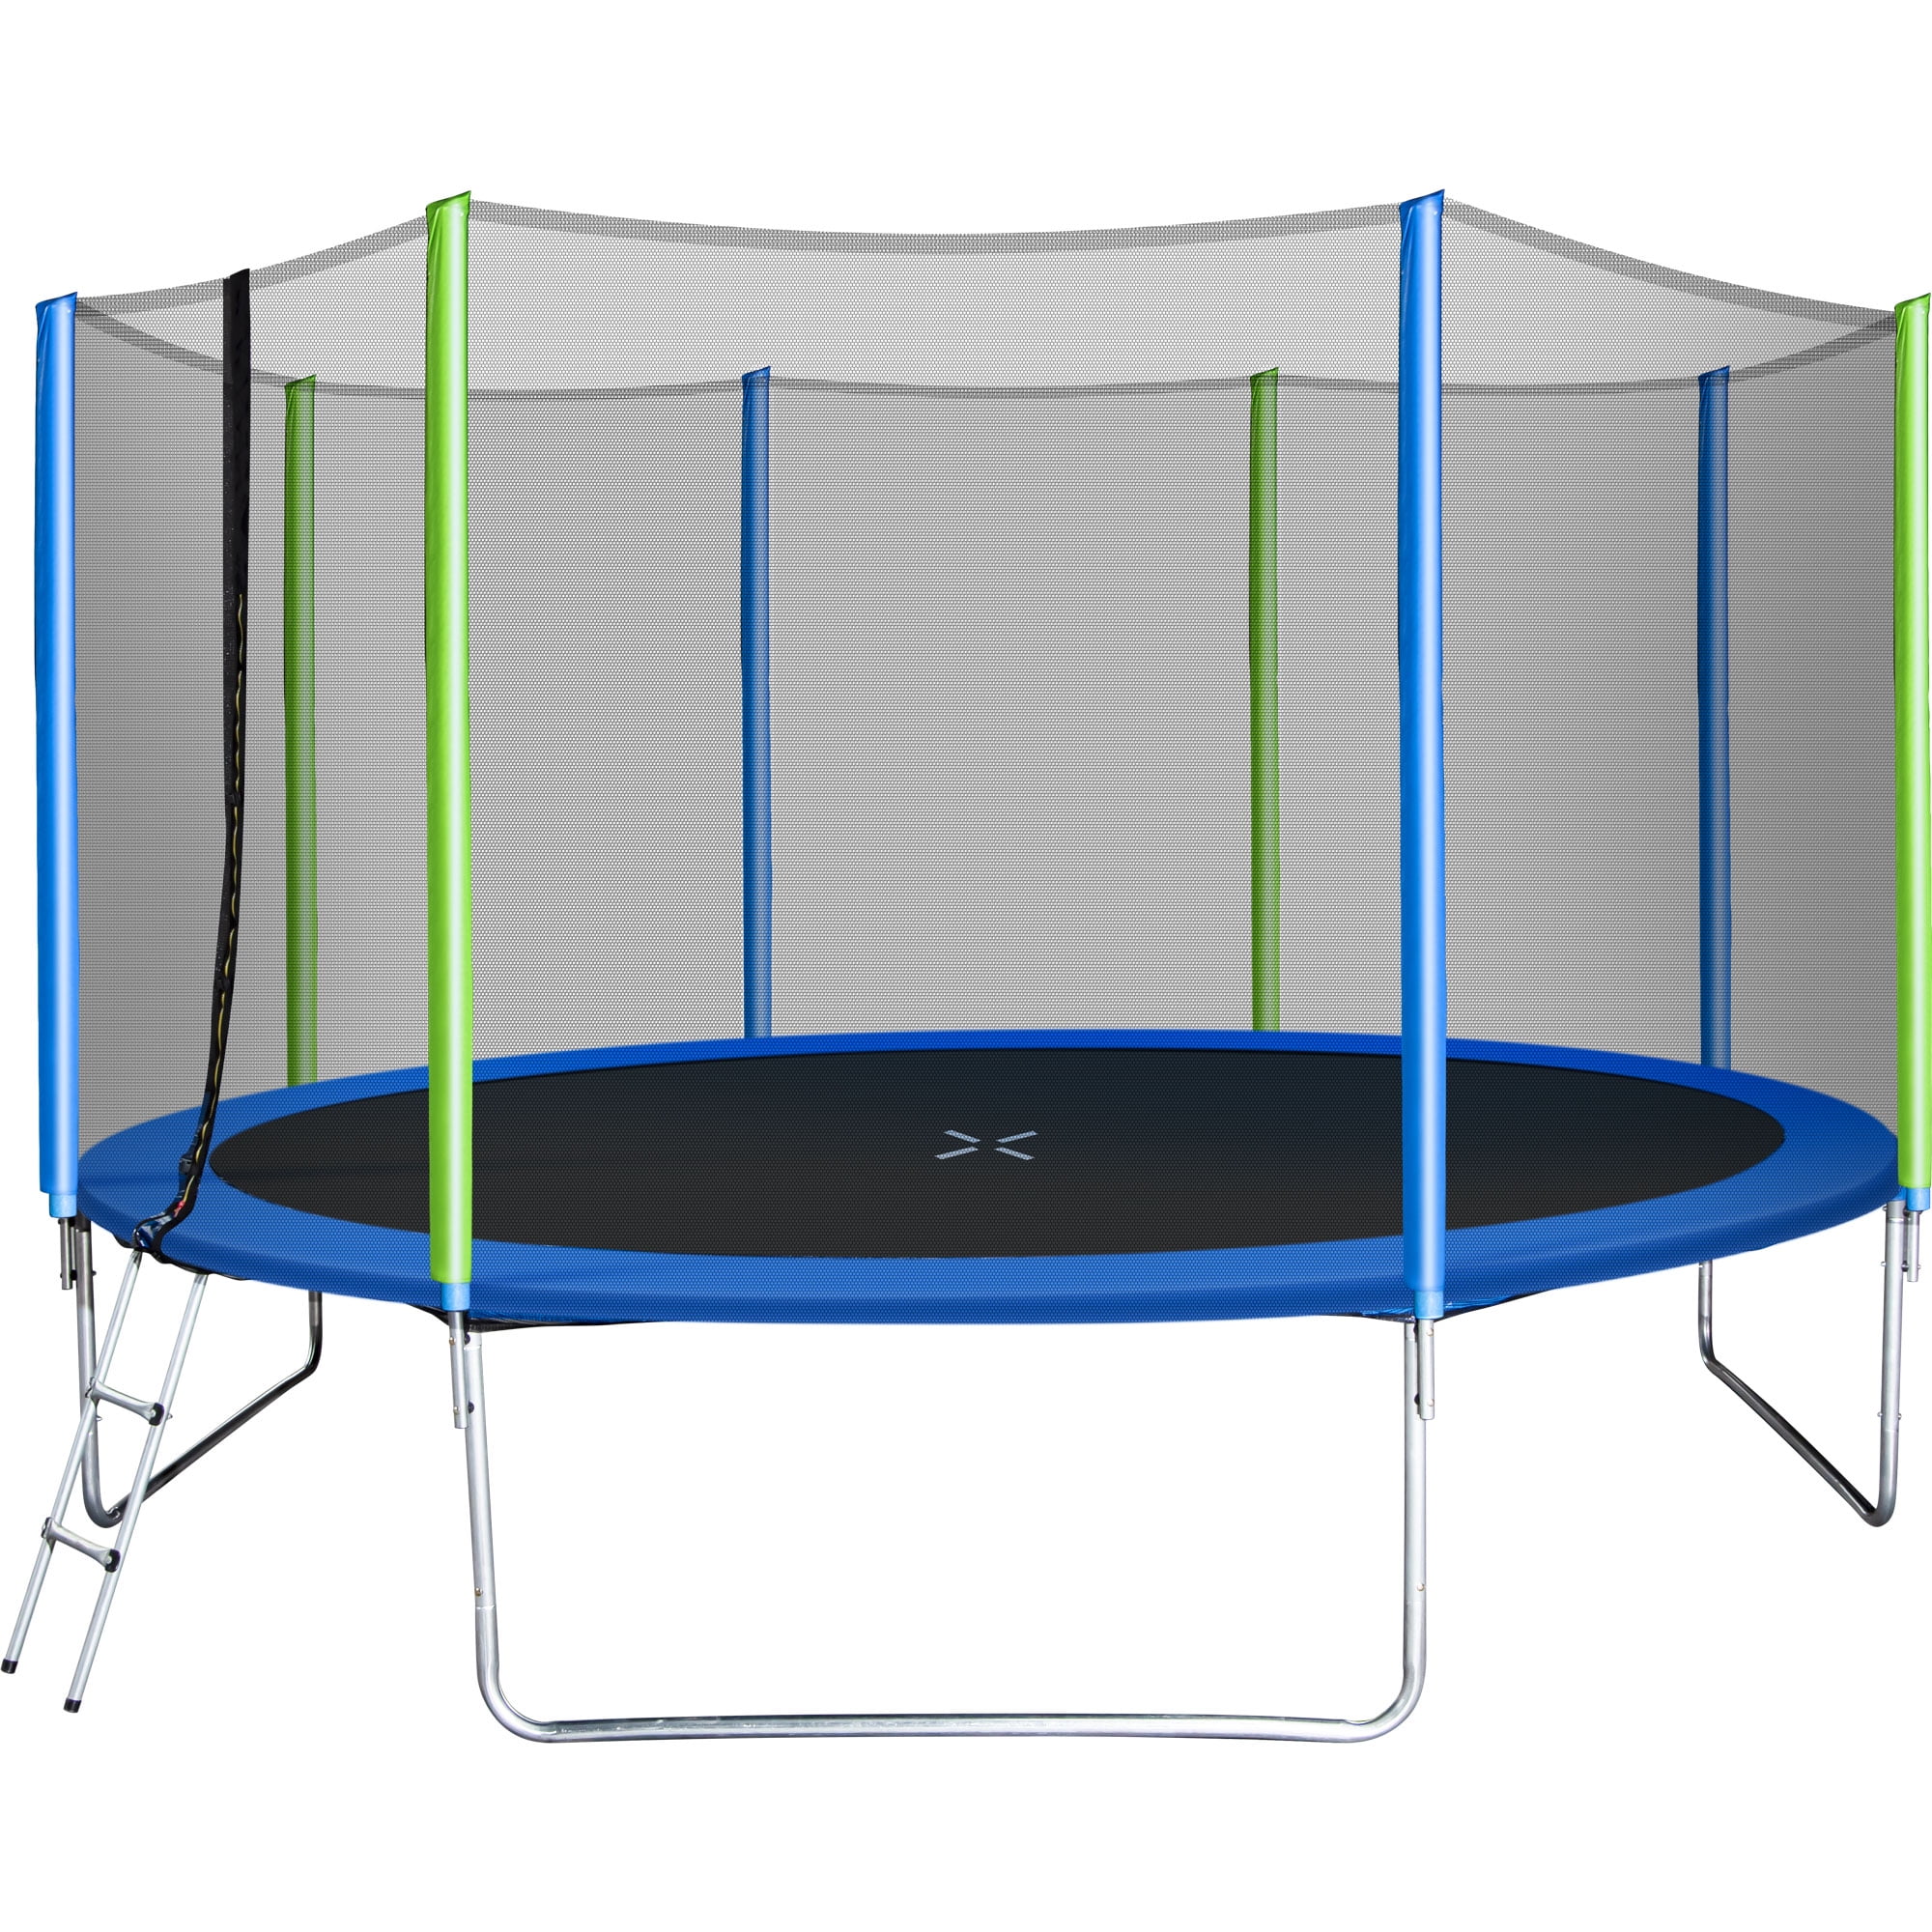 Details about   5 FT Kids Trampoline Safety Net Enclosure Jump Exercise Indoor Outdoor Toddlers 